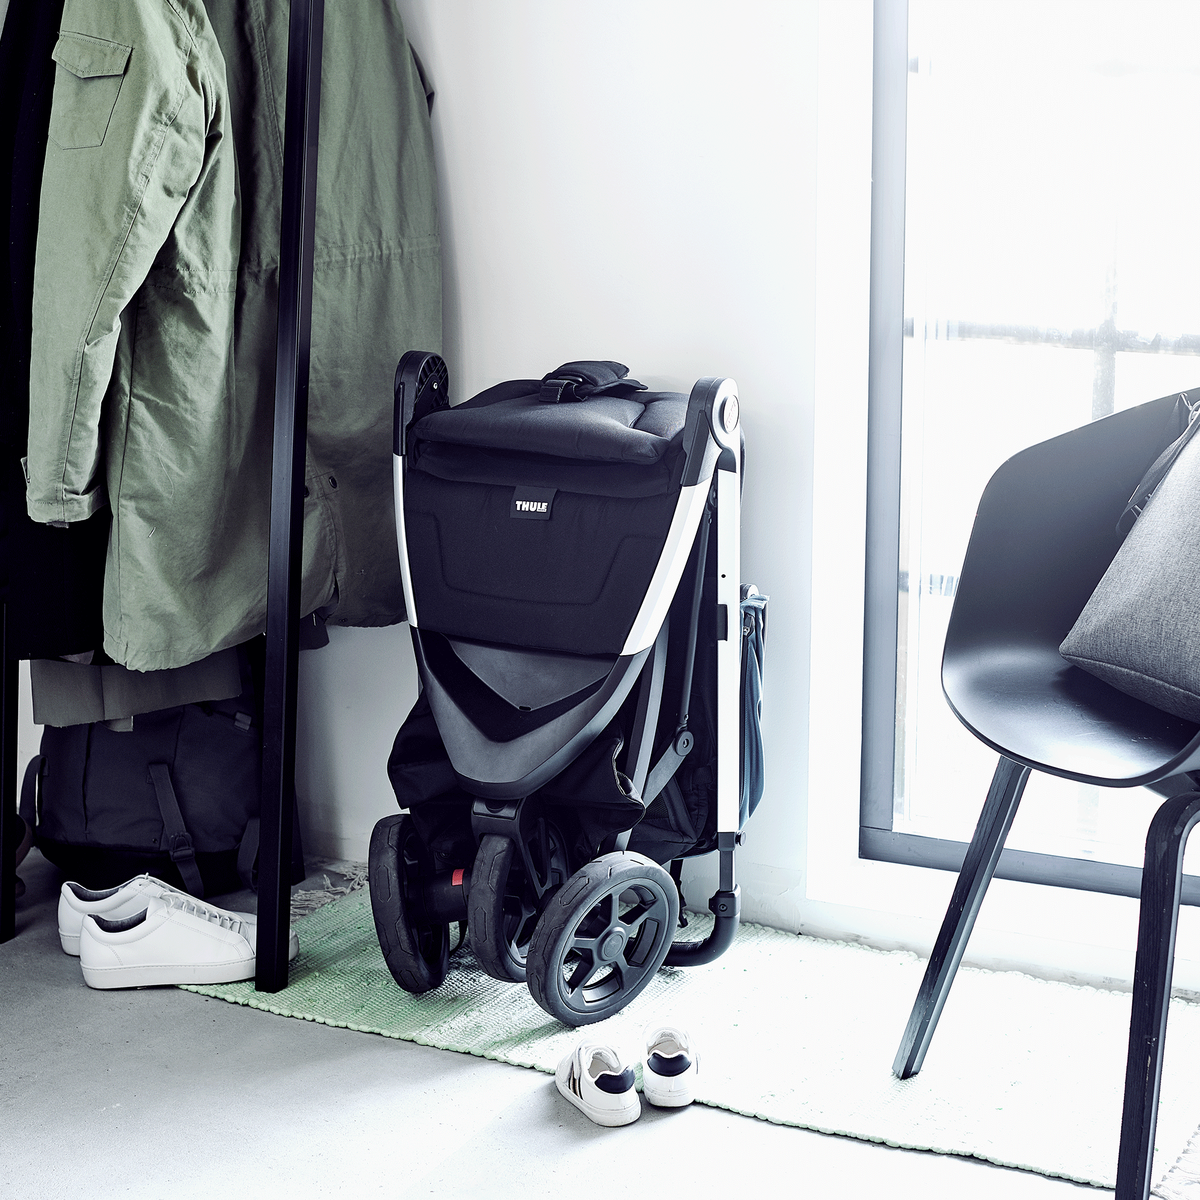 A compact Thule Spring stroller is folded and stored away beside a clothing rack and chair.